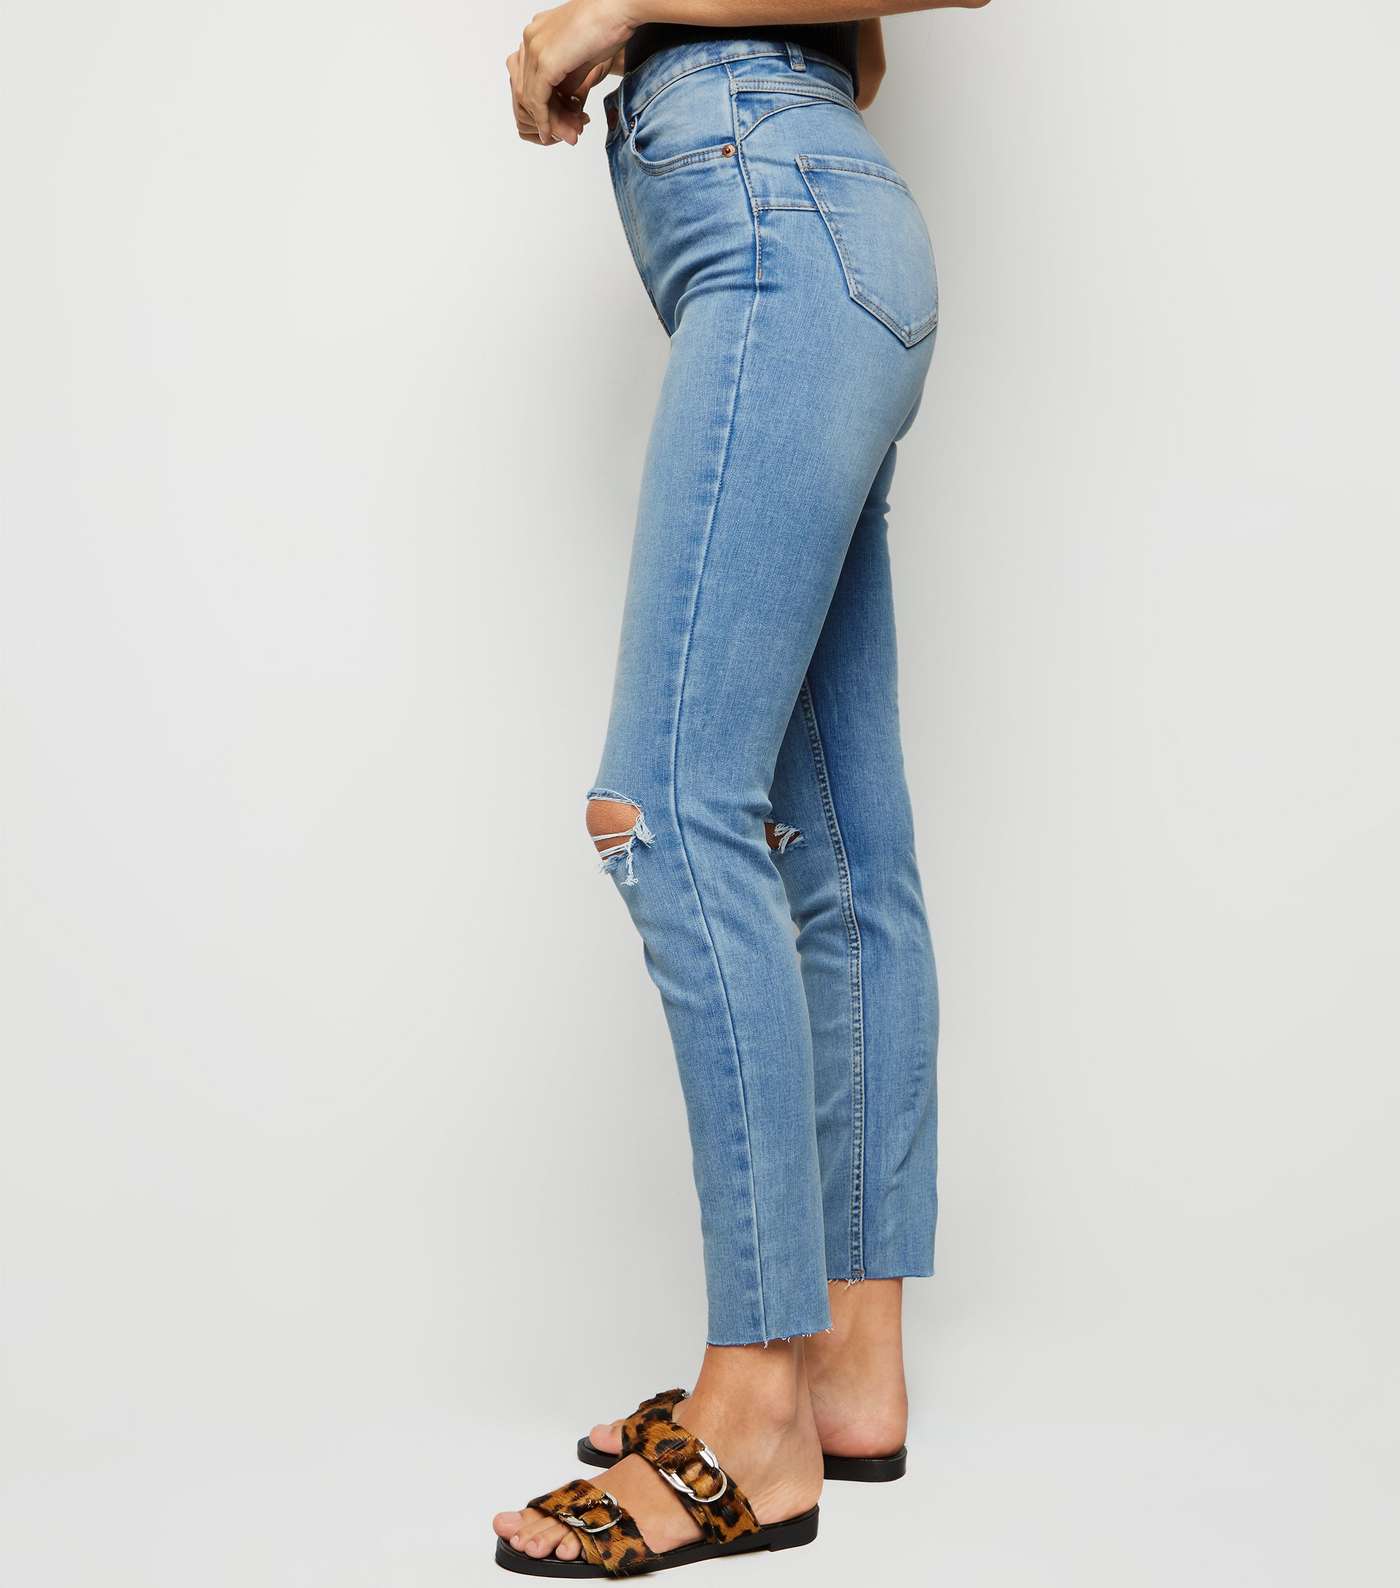 Pale Blue 'Lift & Shape' Ripped Skinny Jeans Image 3